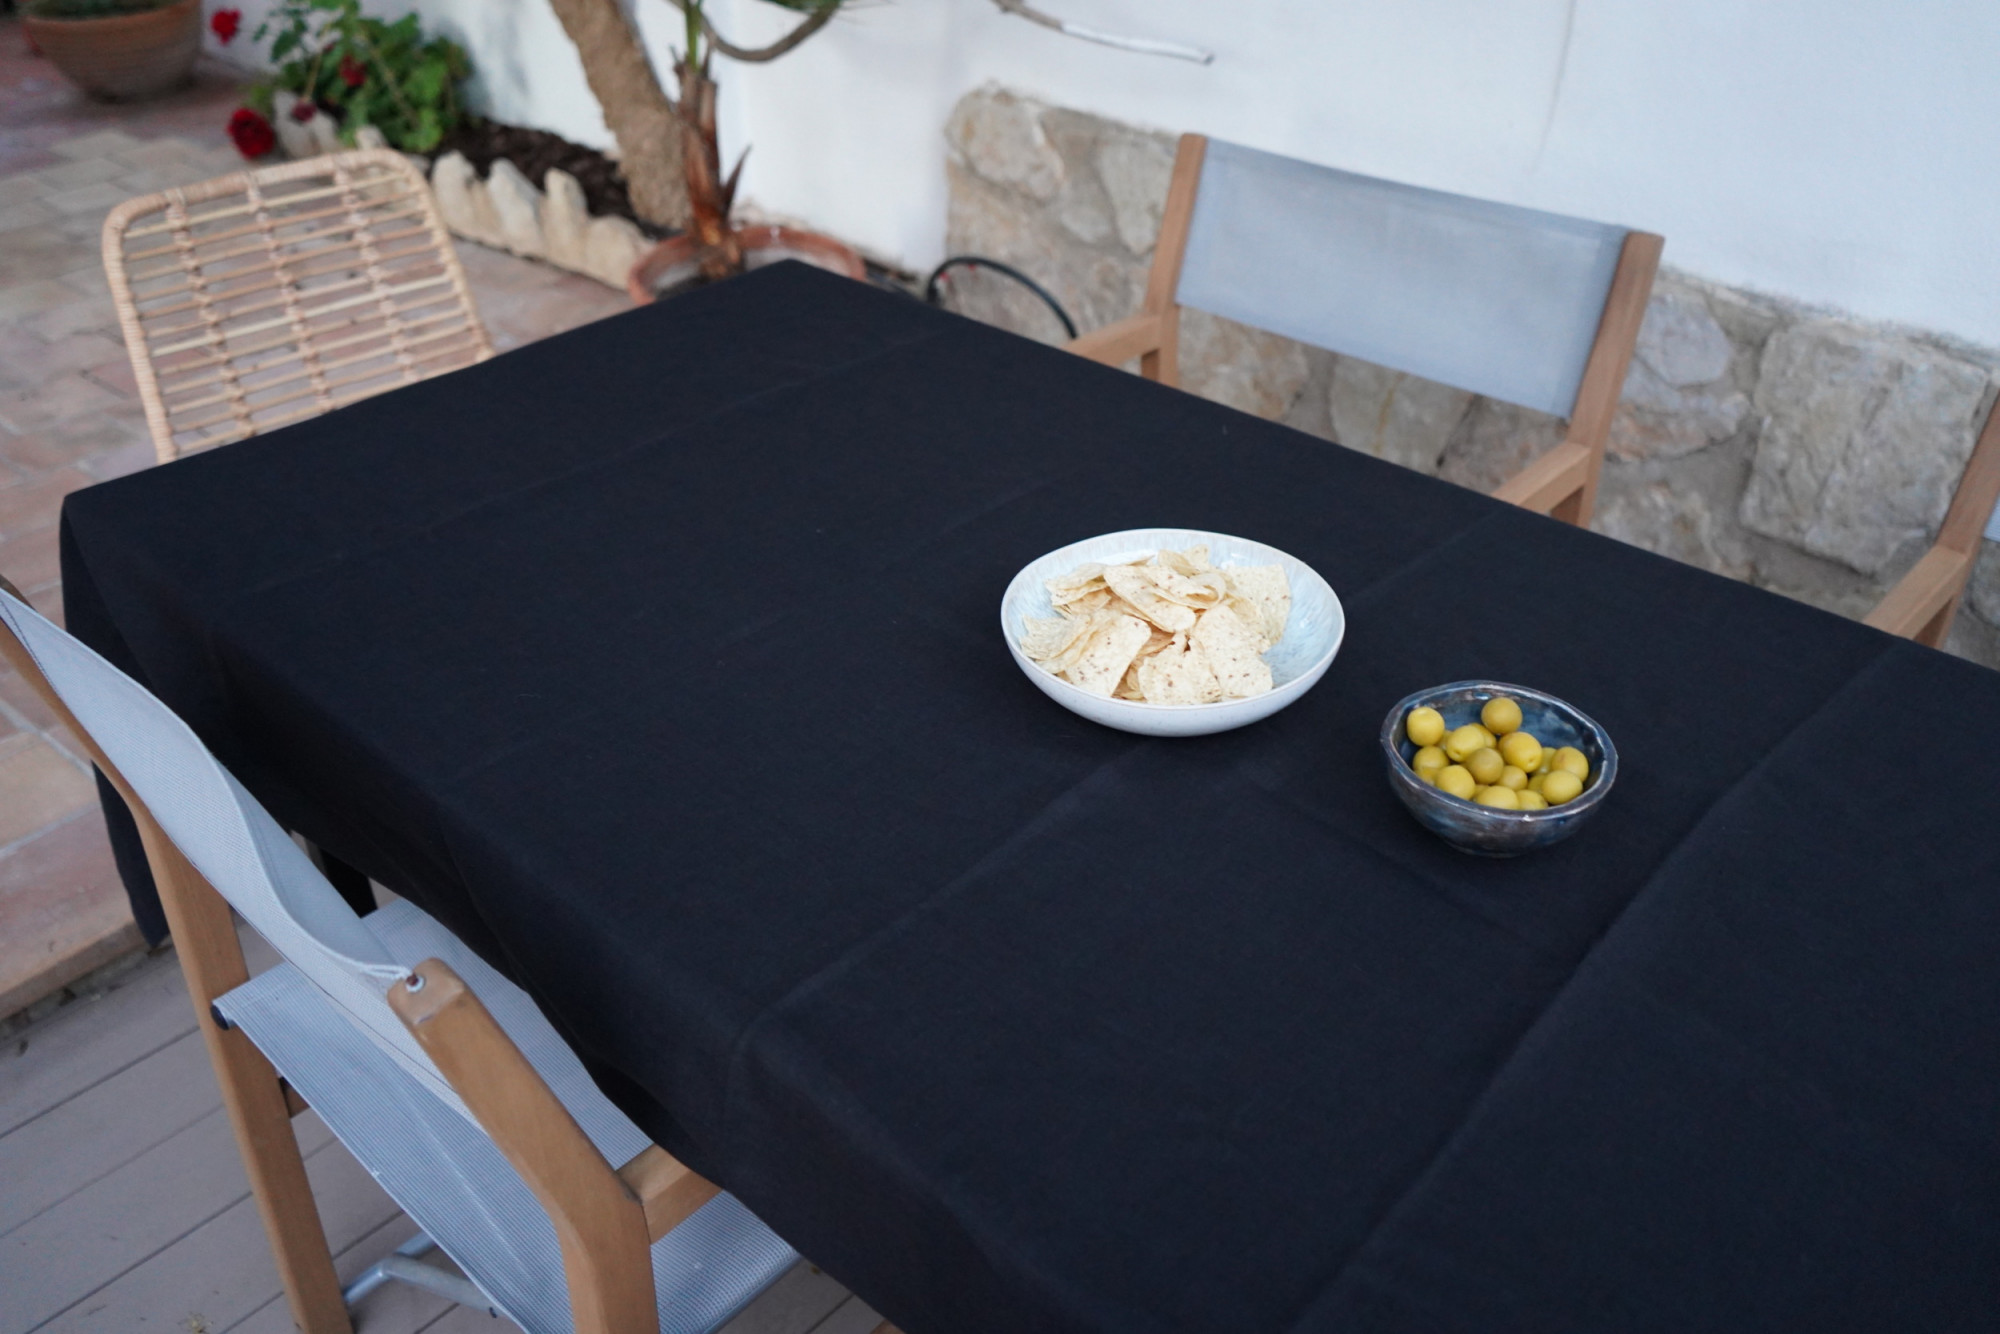 Linen Tablecloth Stonewashed – Off Black, on outdoors table